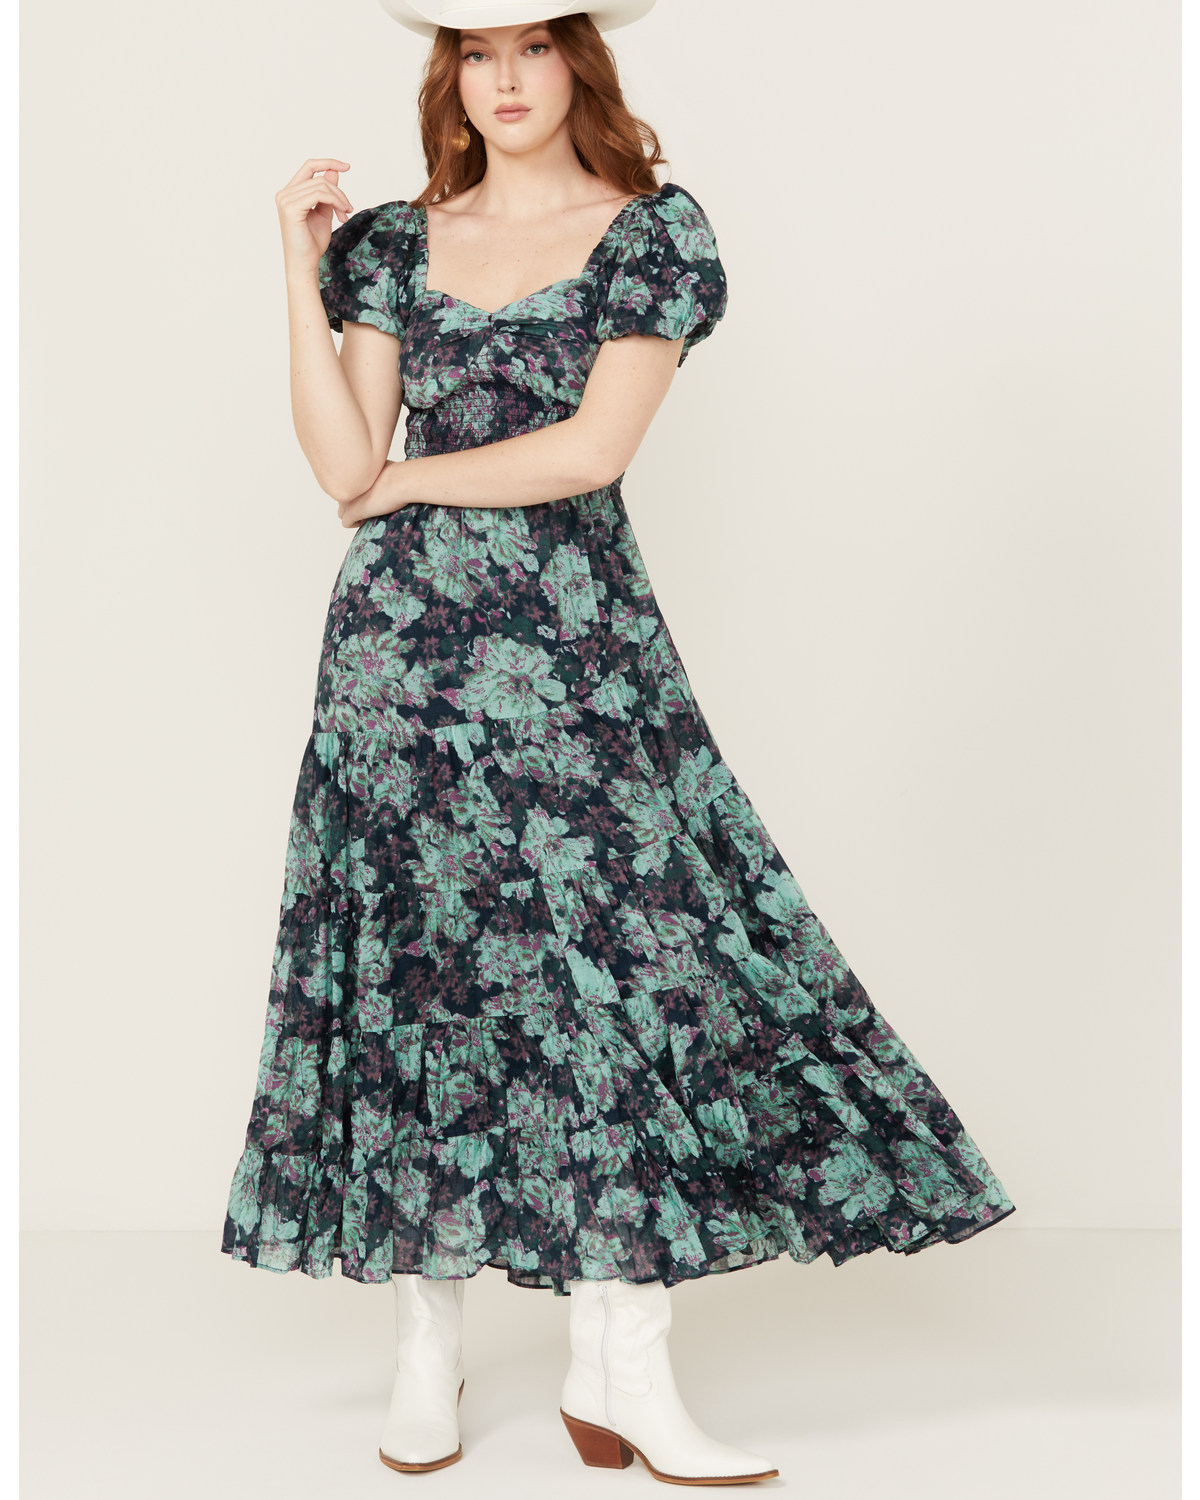 Free People Women's Sundrenched Floral Short Sleeve Maxi Dress